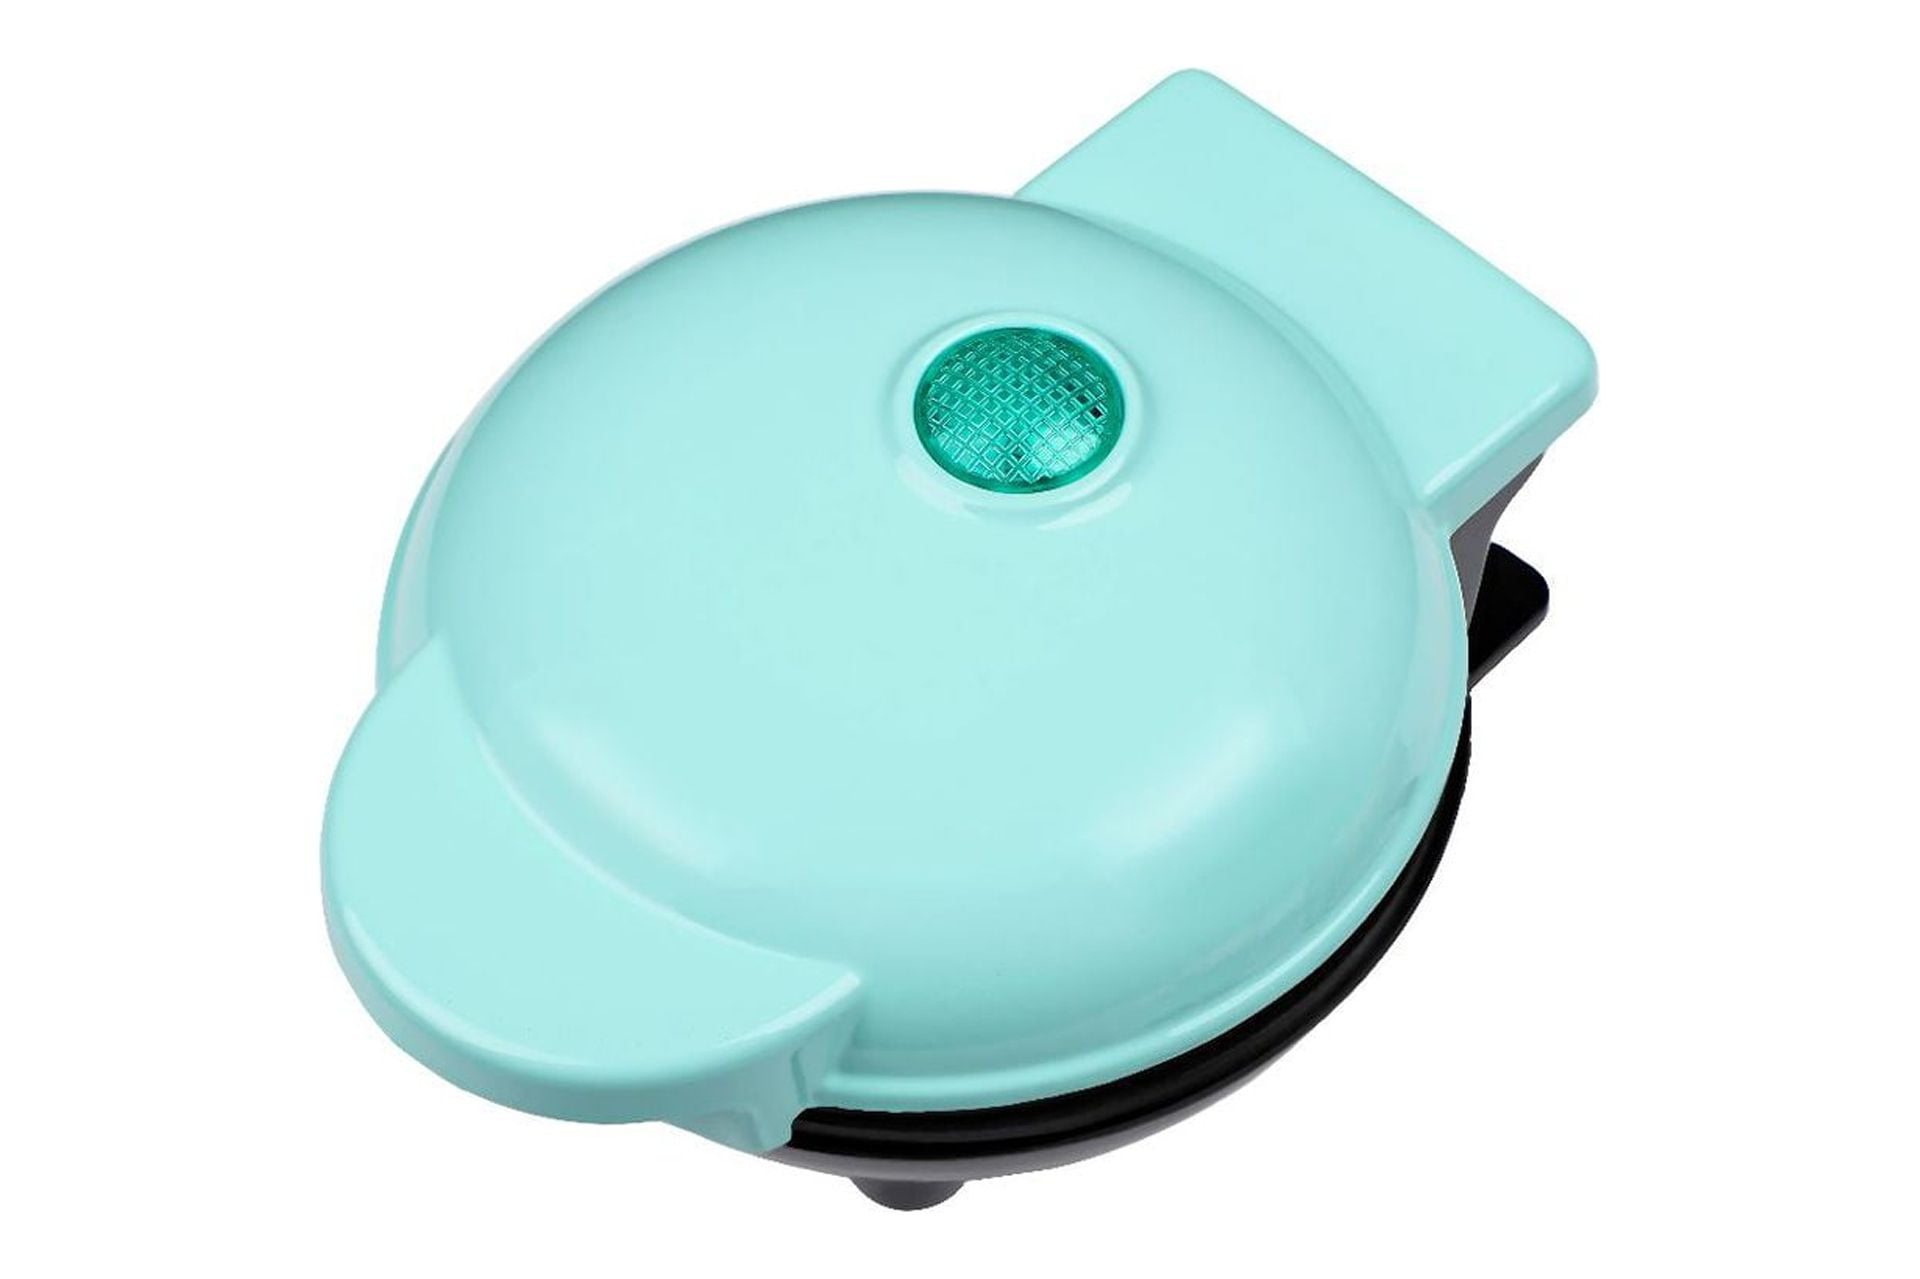 Mini Waffle Maker, Small Waffle Maker, Nonstick Chaffle Maker For Hash  Browns, Keto Chaffles Easy To Clean For Individual Pancakes, Cookies, Eggs  & Br